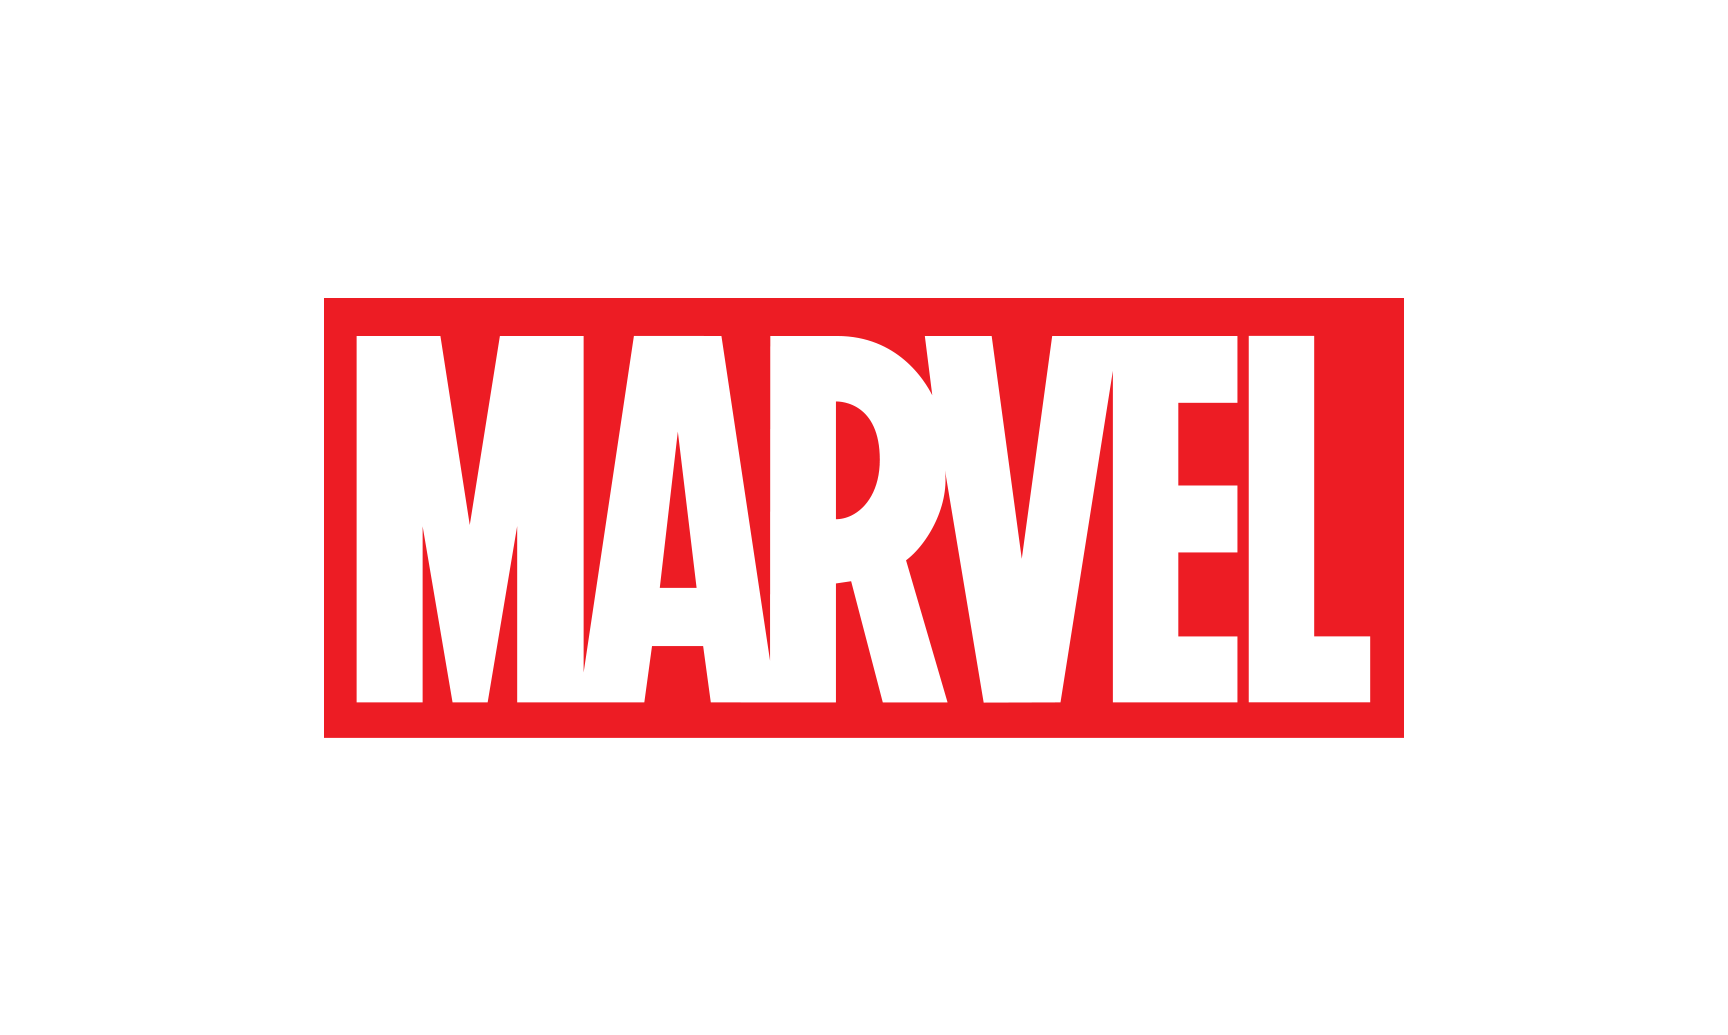  MARVEL MULTIVERSE ROLE-PLAYING GAME: PLAYTEST RULEBOOK:  9781302934248: Marvel Various, Coello, Iban, Forbeck, Matt: Books